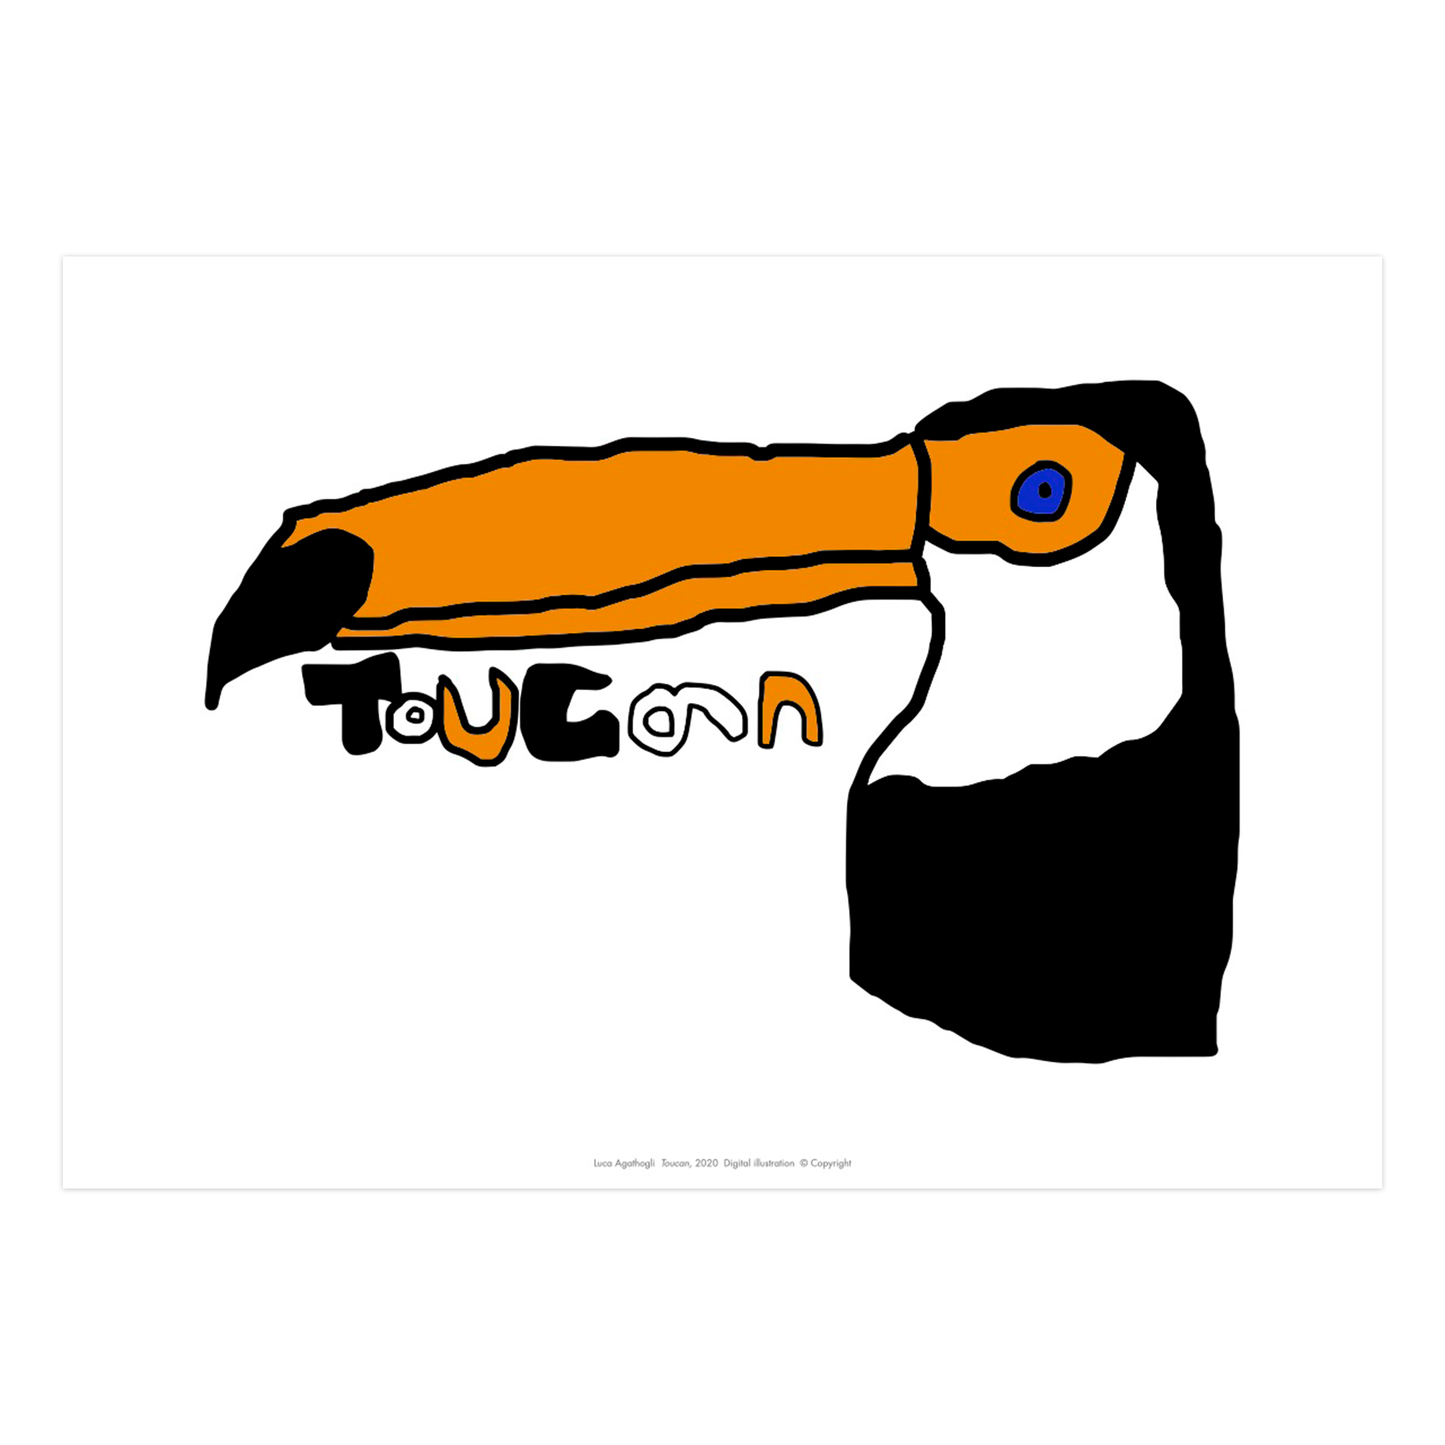 Limited edition artwork of  a toucan by Luca Agathogli